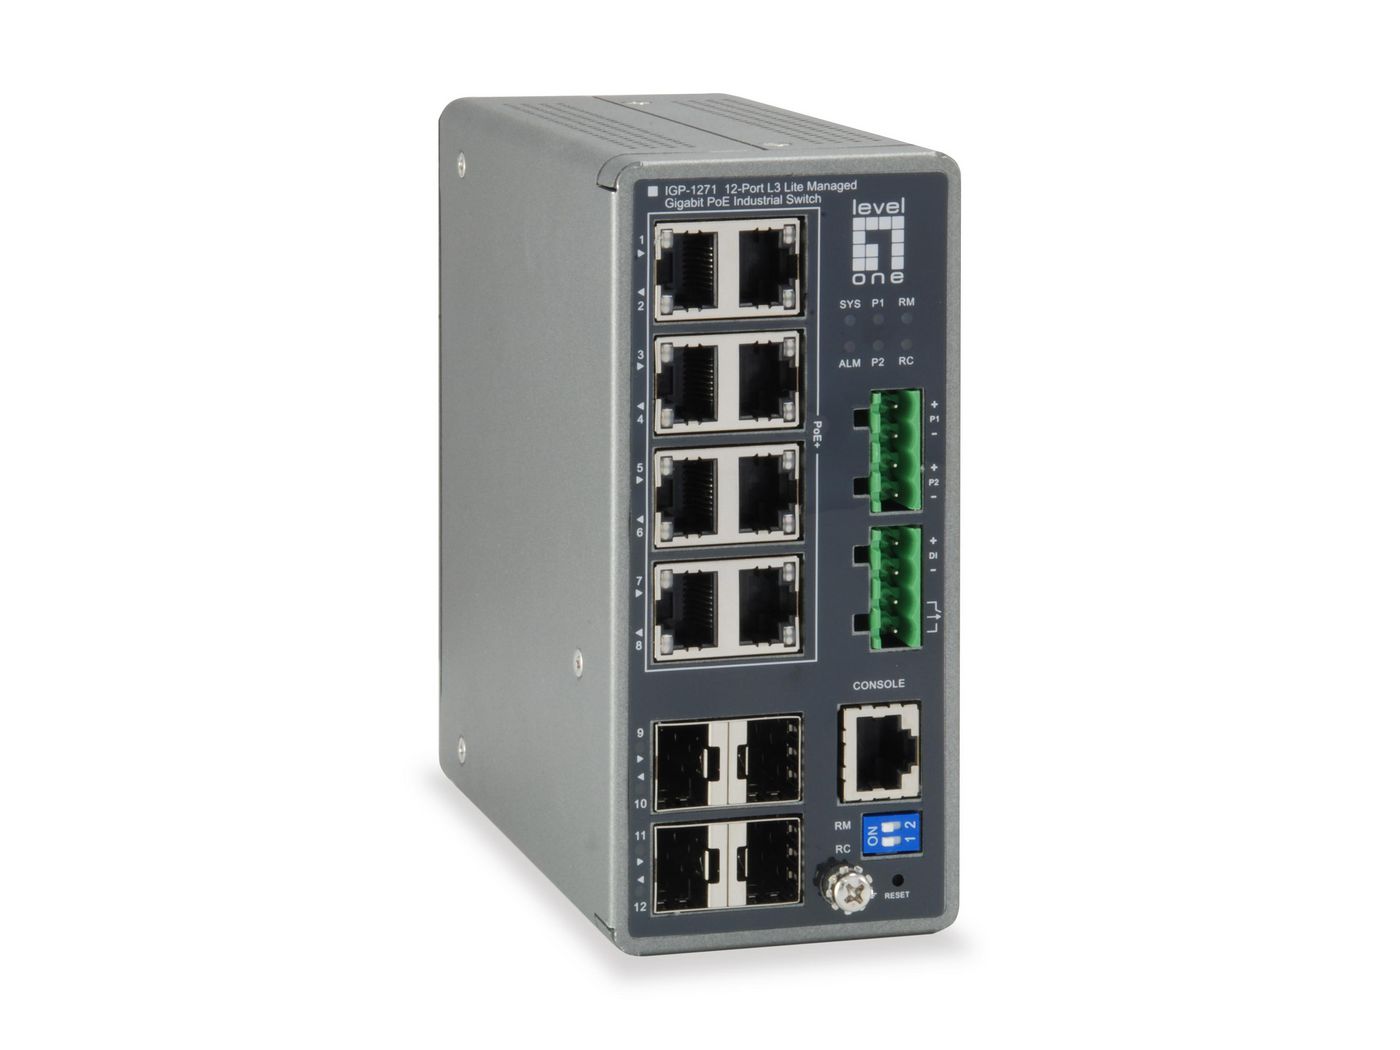 LevelOne IGP-1271 Industrial Switch 12-Port 